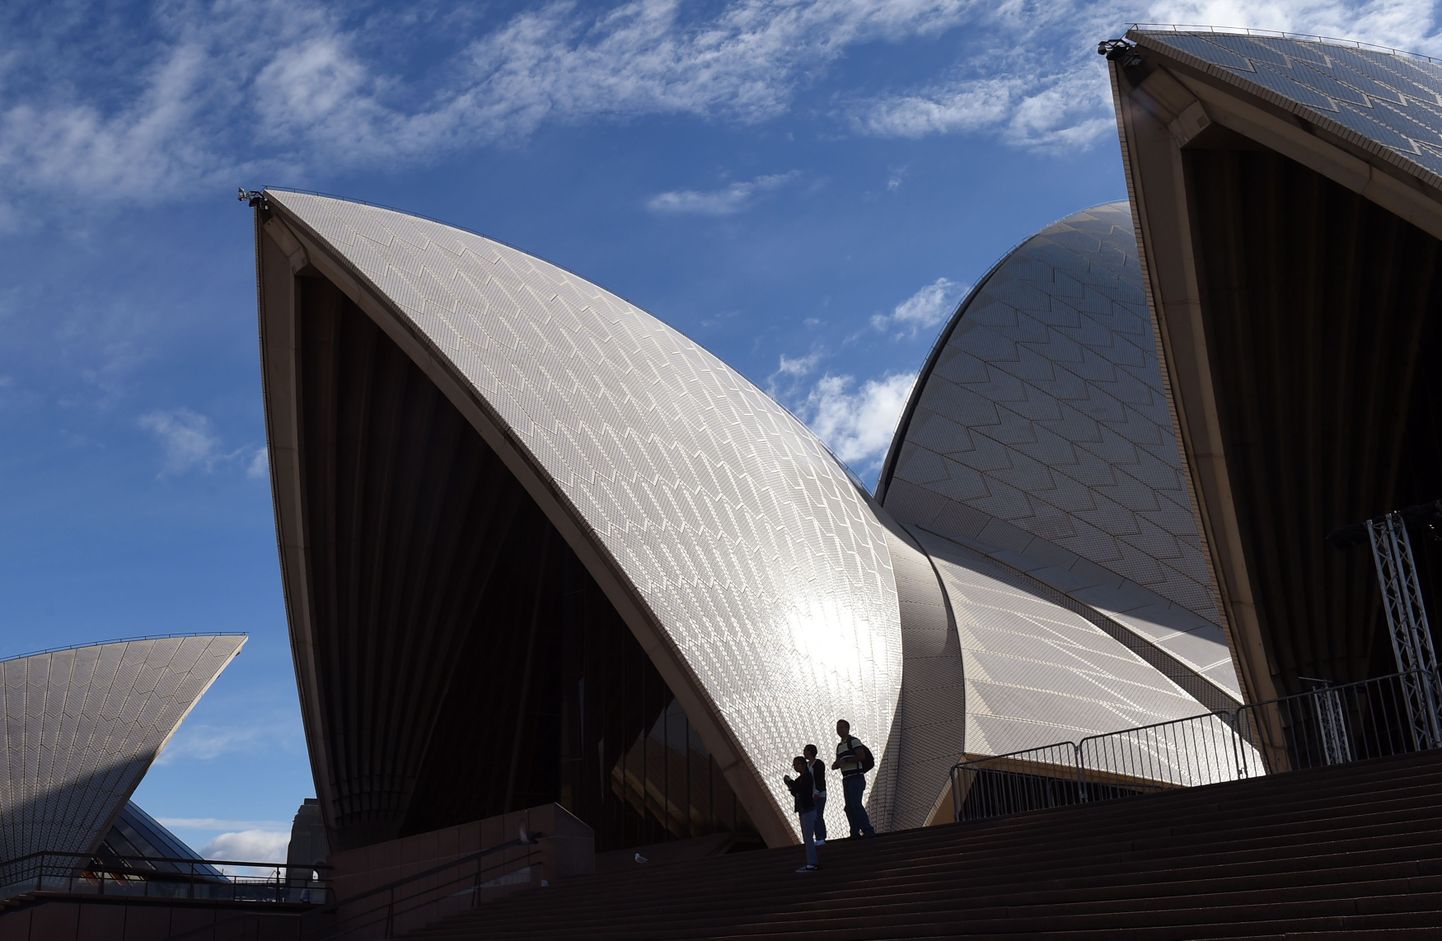 Sydney ooperimaja




The story behind the Sydney Opera House and its Danish architect Jorn Utzon is to be made into a movie, with the Swedish producer behind "The Girl with the Dragon Tattoo" on board. 

 / AFP PHOTO / WILLIAM WEST